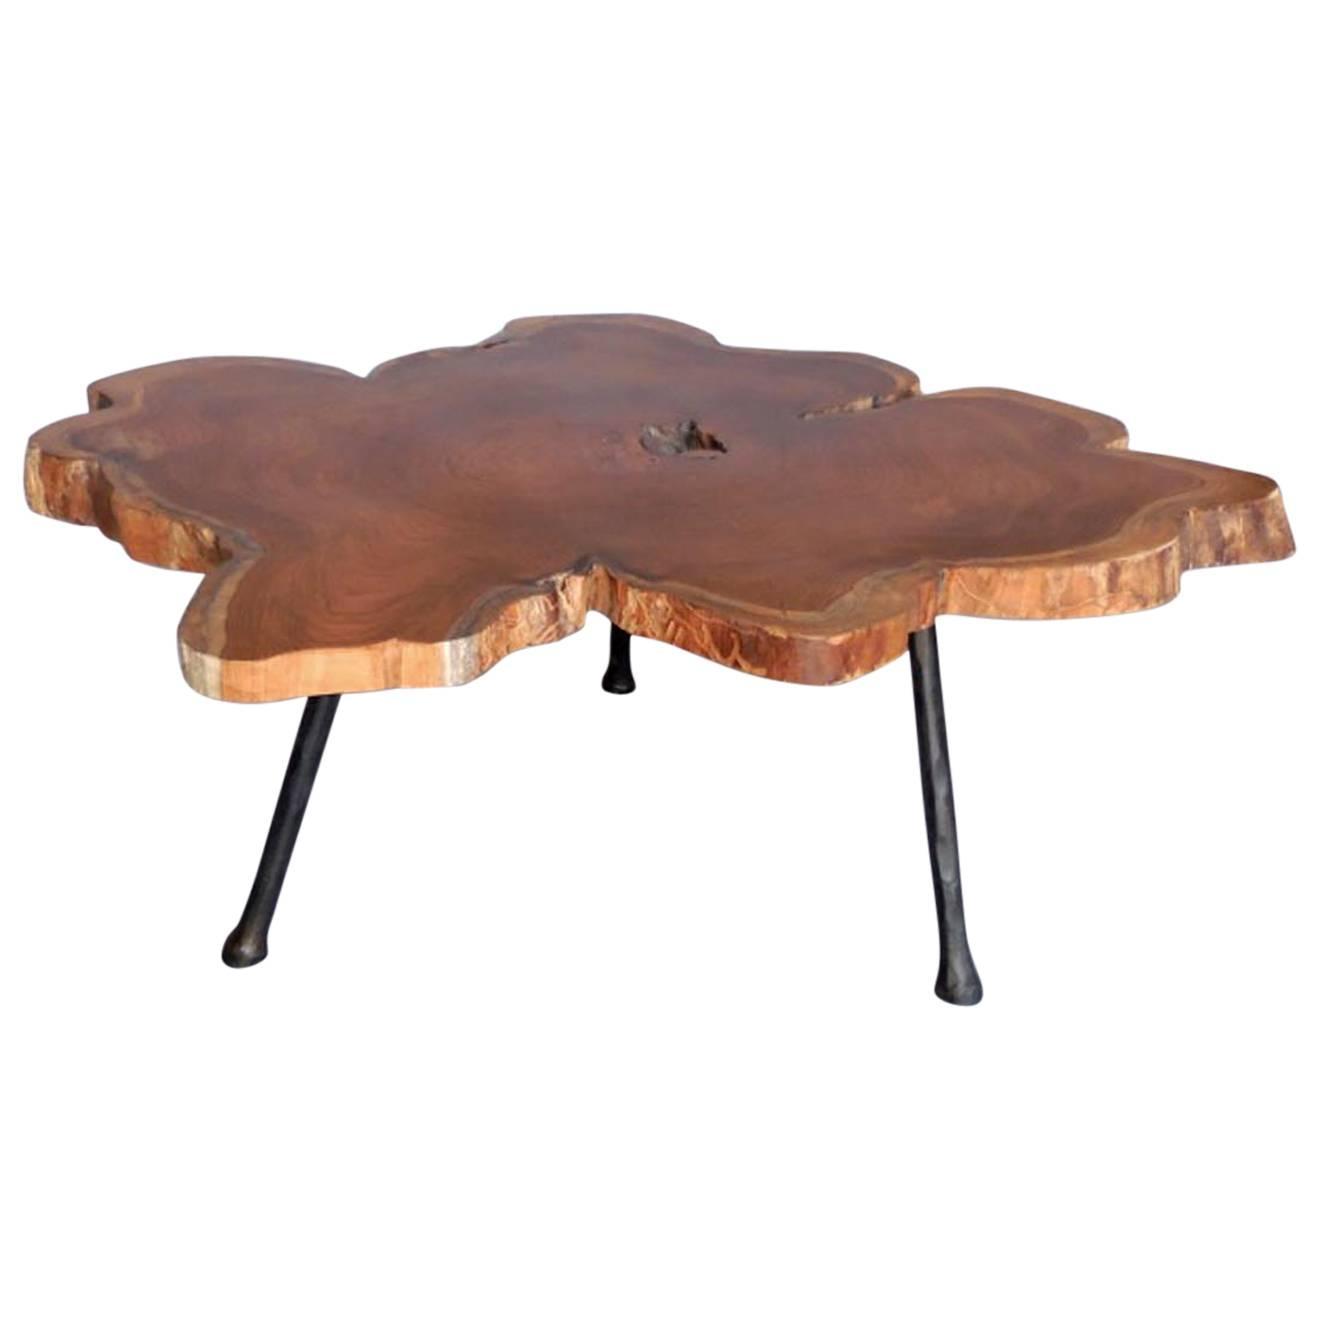 Organic Modern Coffee Table For Sale at 1stdibs